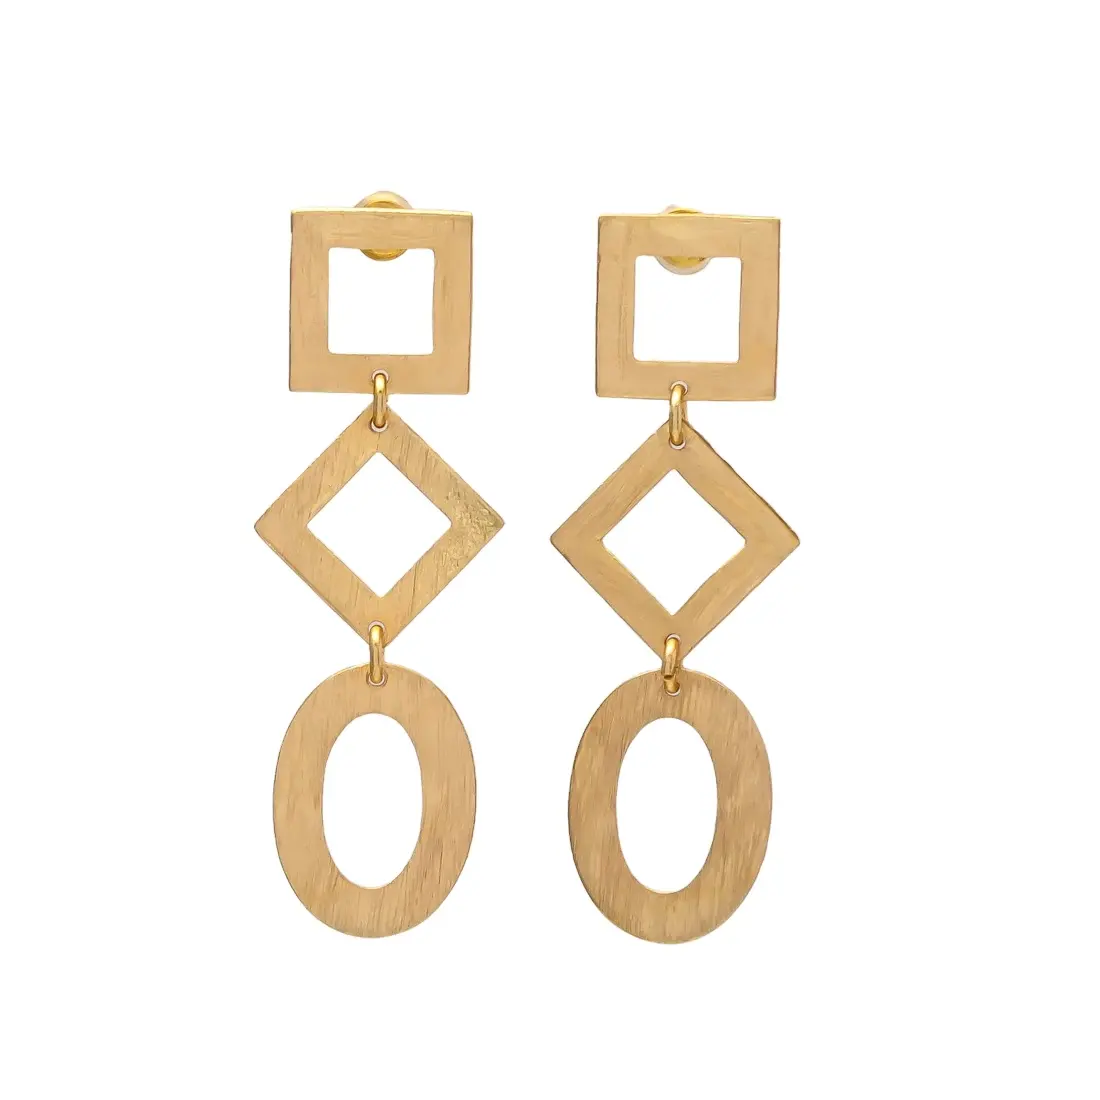 Square and Circle Sparklers gold plated brass earring set for women and girls